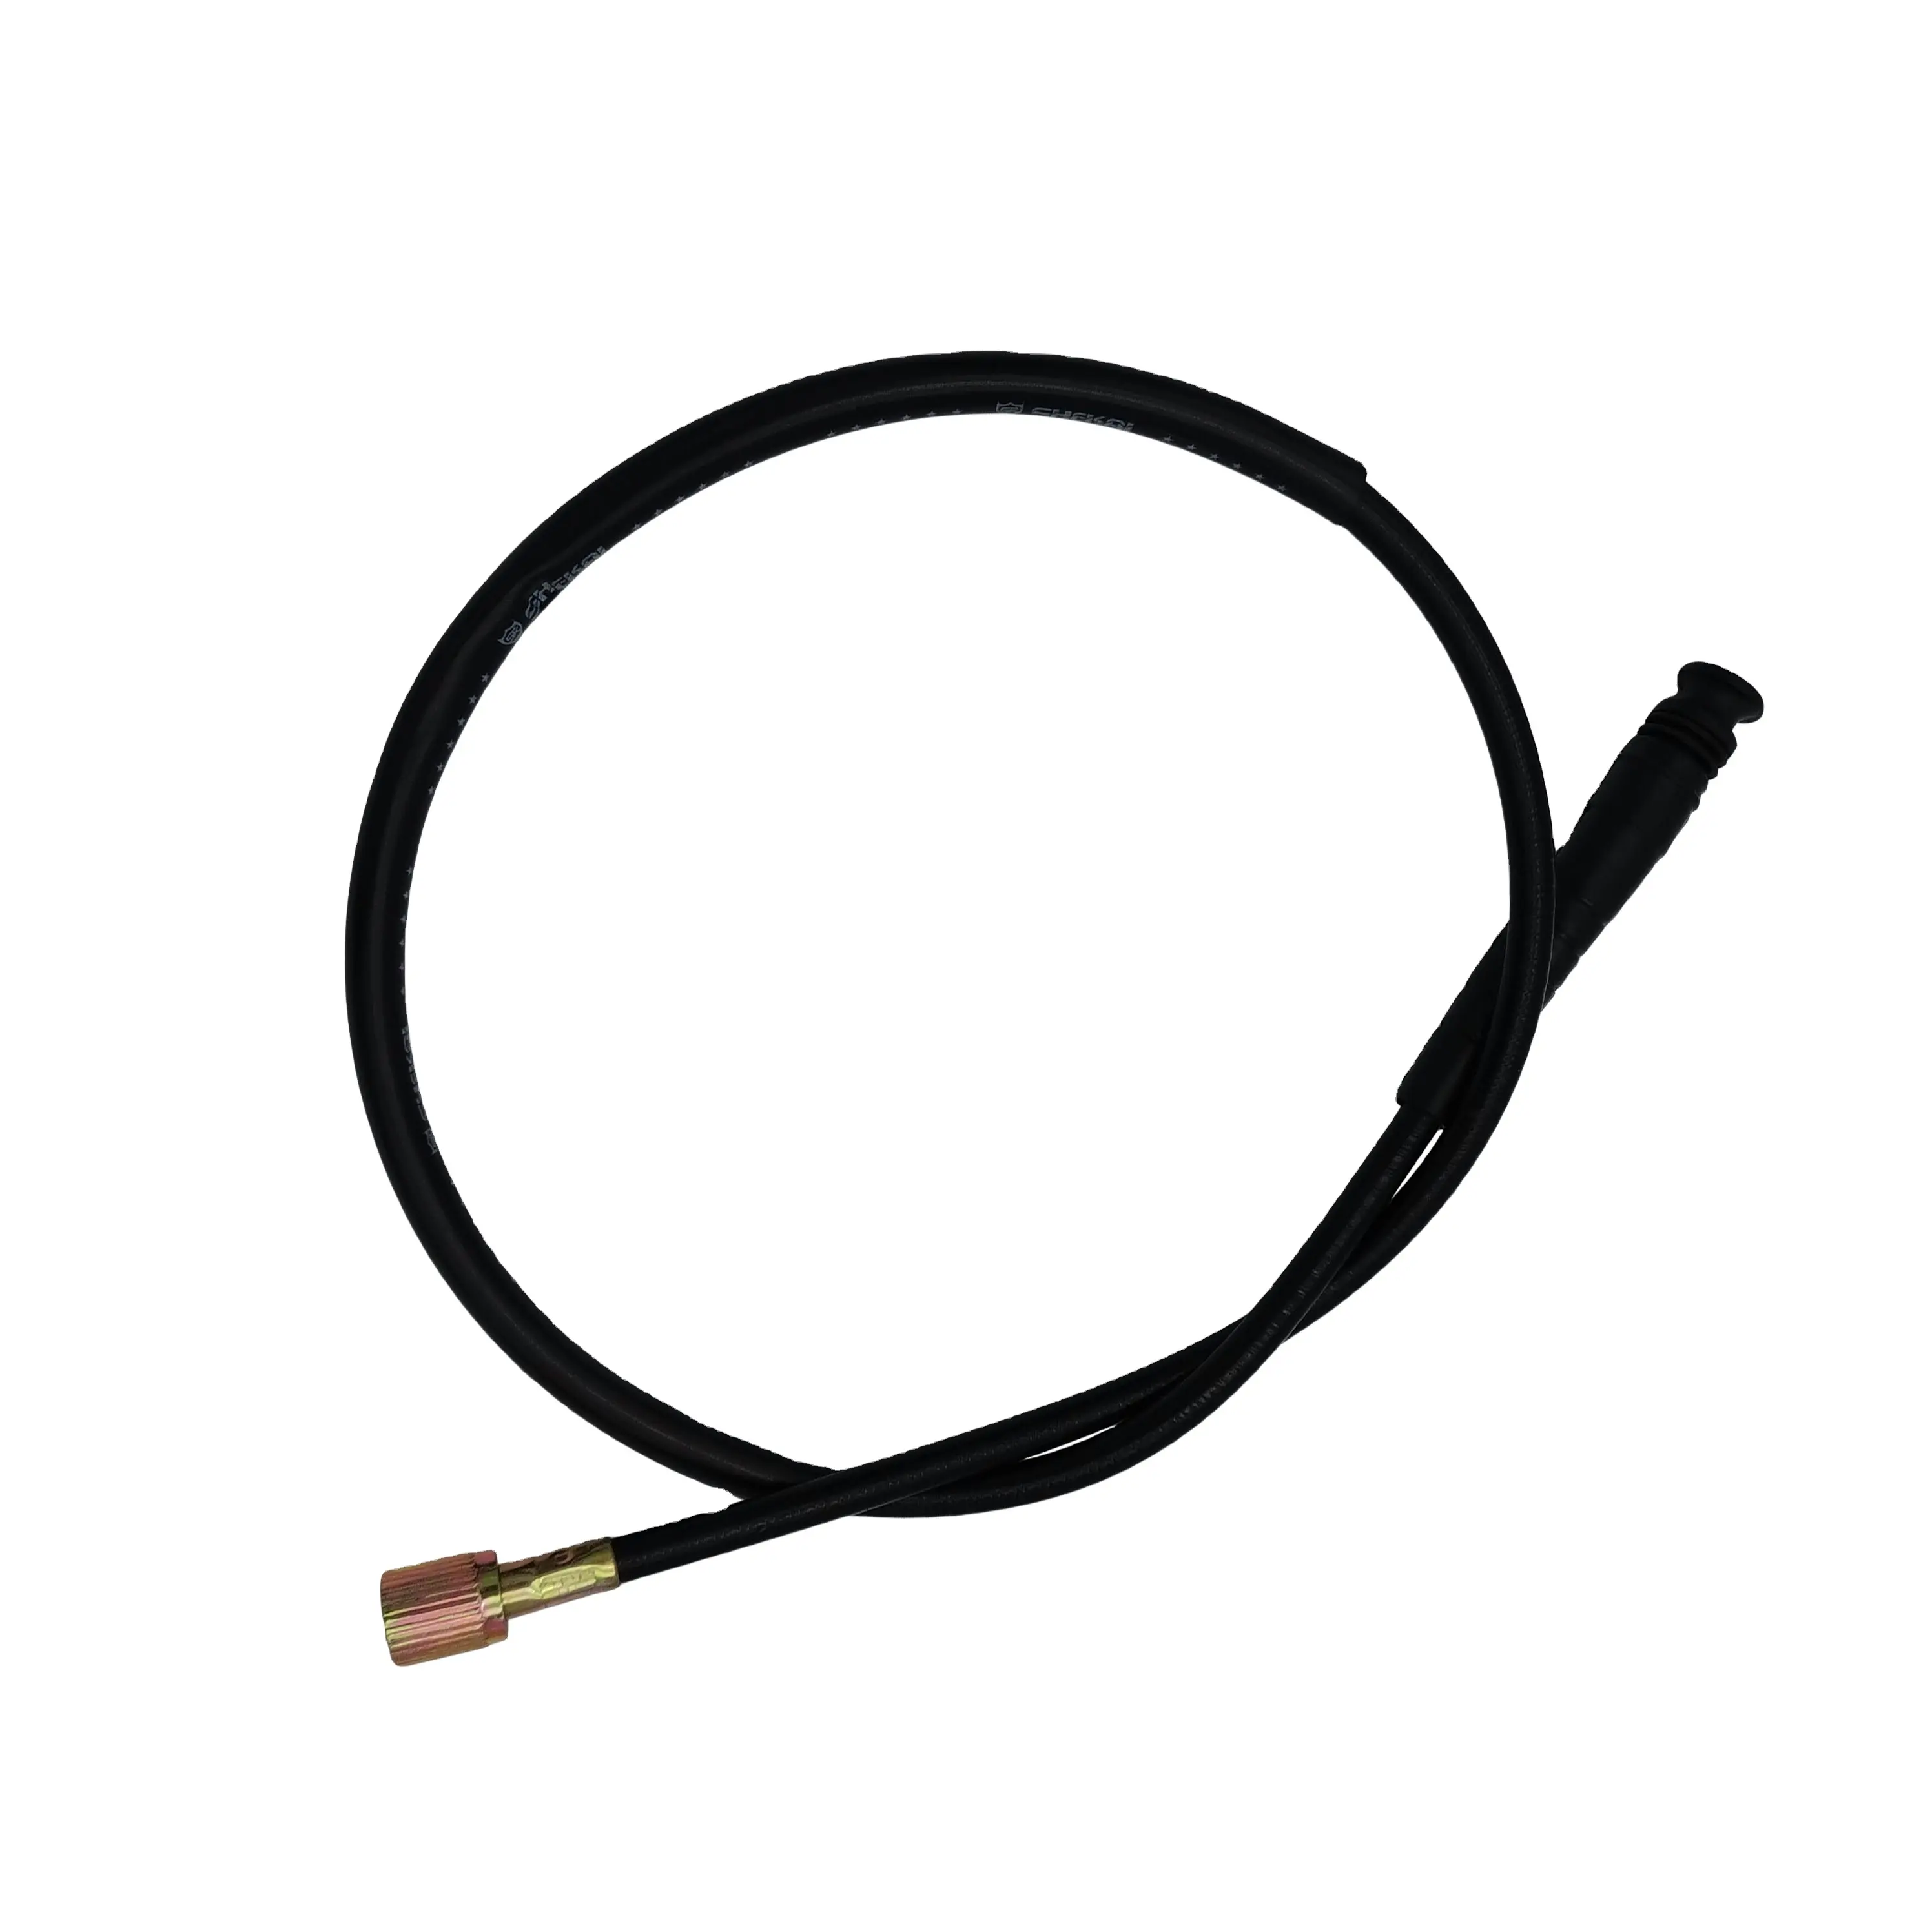 Good Quality Manufacturer Motor Parts Inner Cable Fititng for CG125 Motorcycle Speedometer Cable